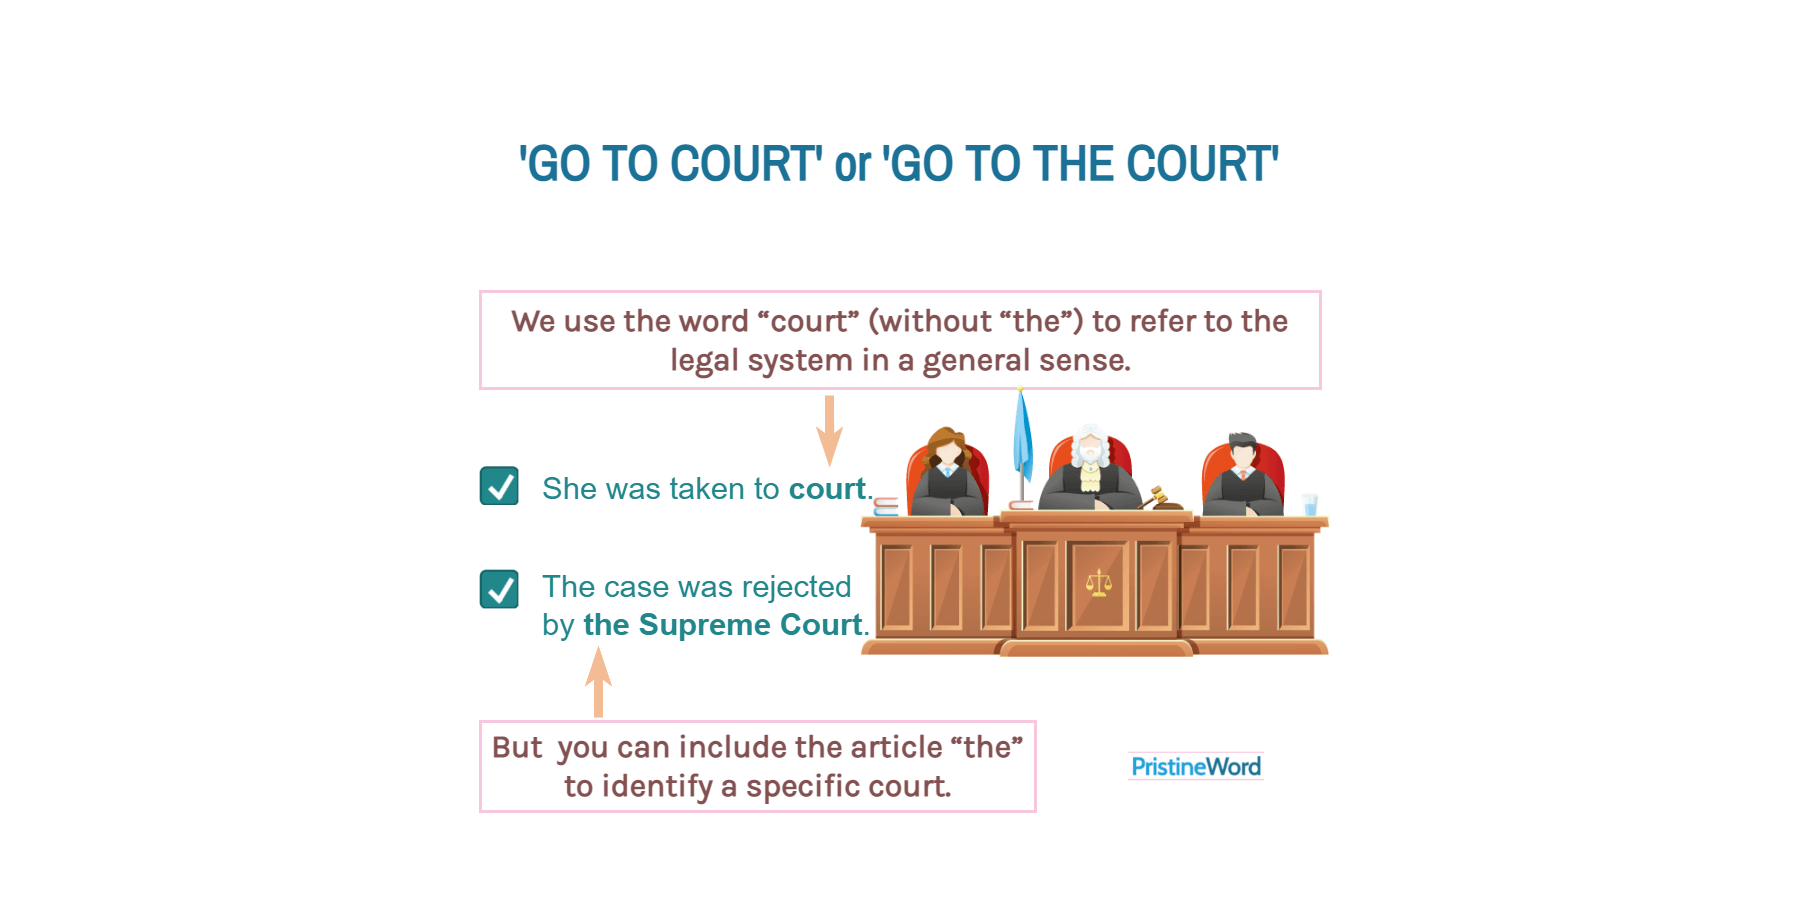 Can You Use the Article 'The' Before 'Court'?